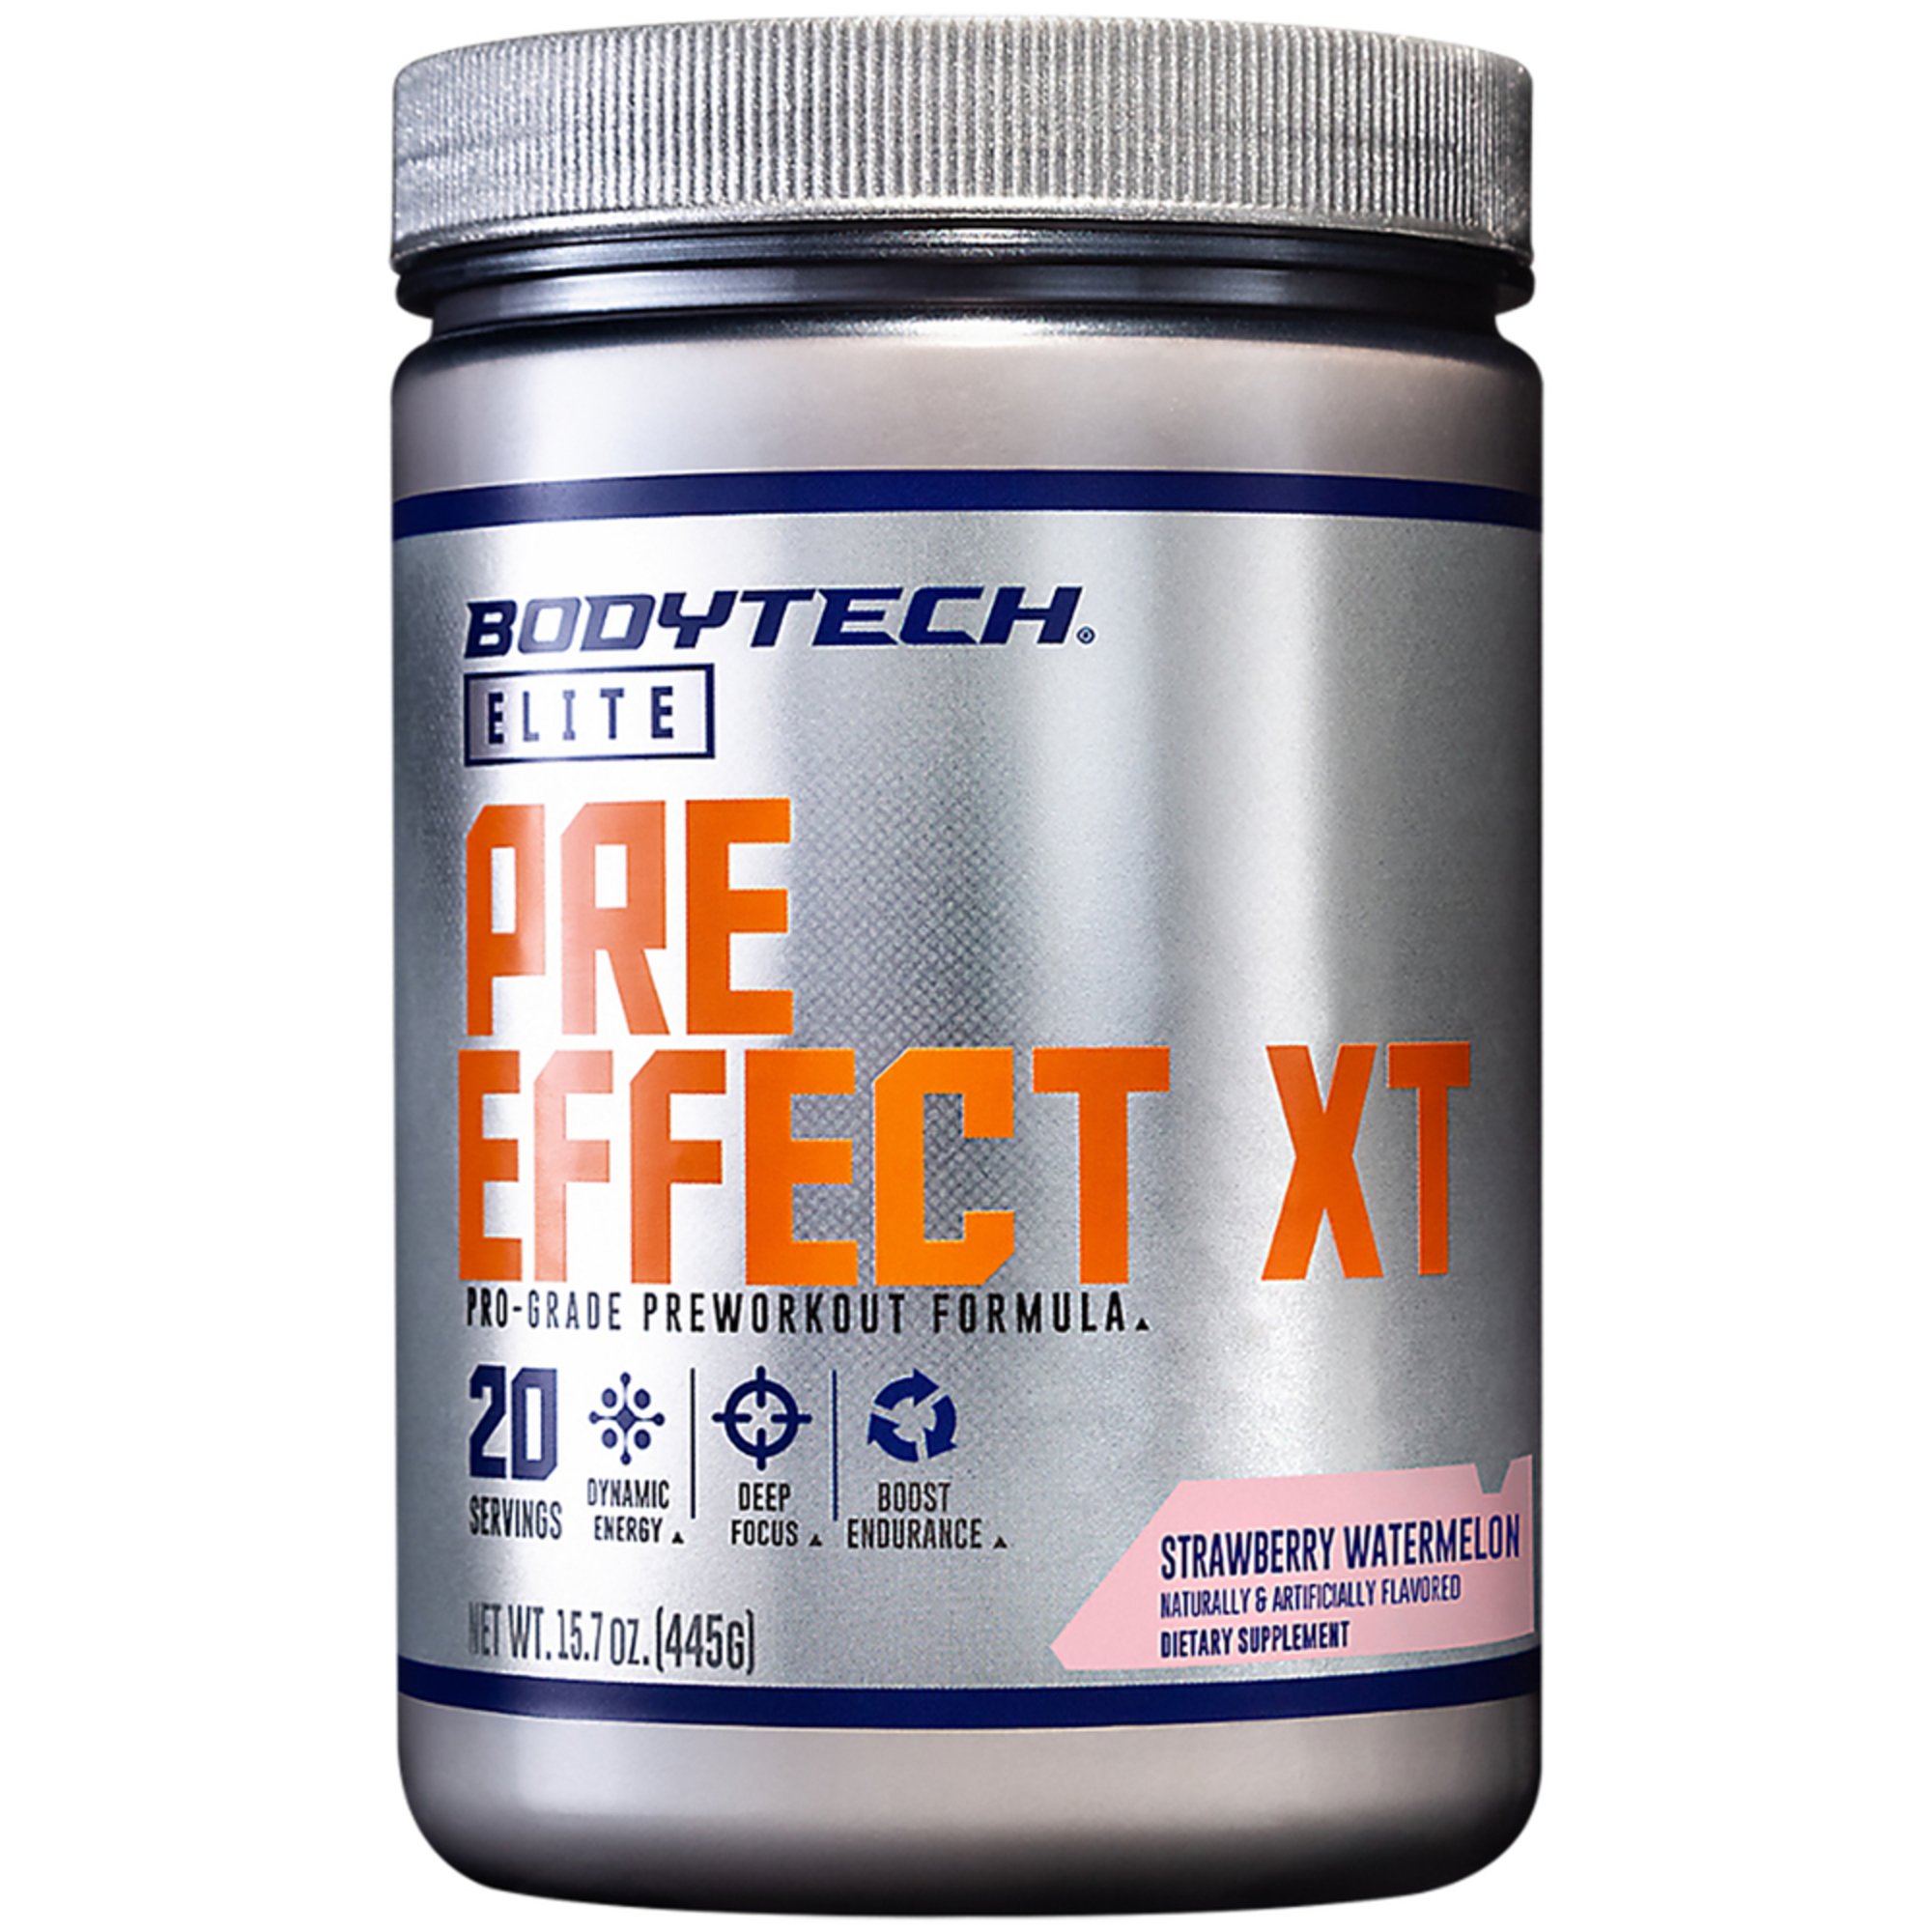 5 Day Project 1 pre workout for Women